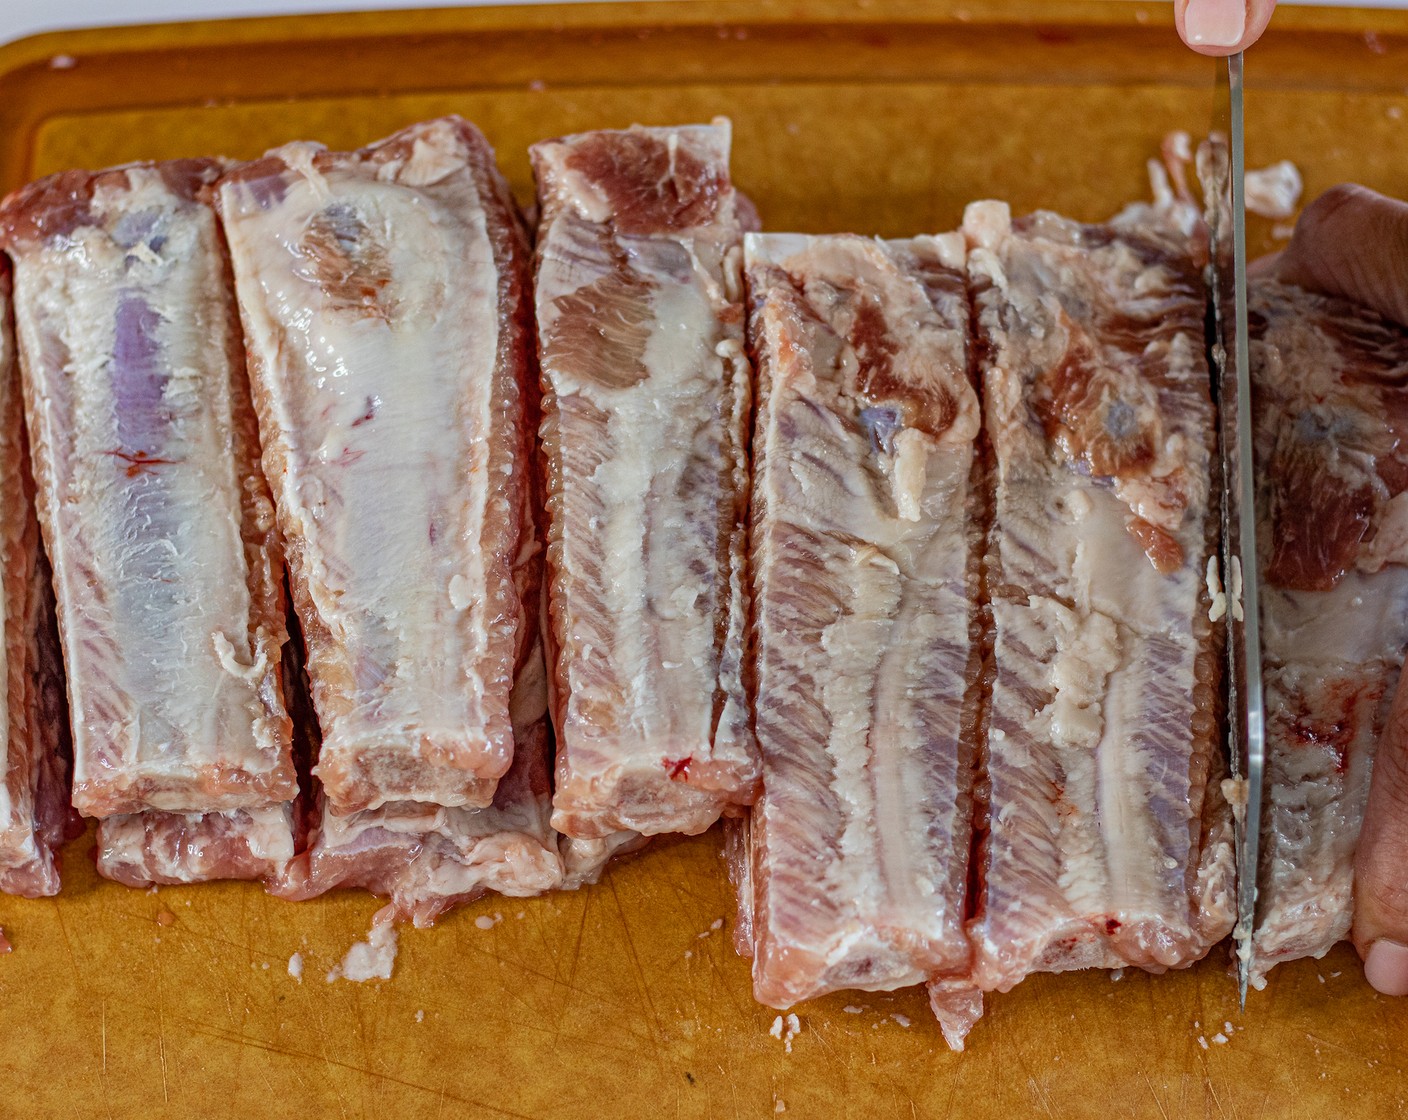 step 3 Once done, slice off each rib and place it in a bowl. Rinse well with water and drain.